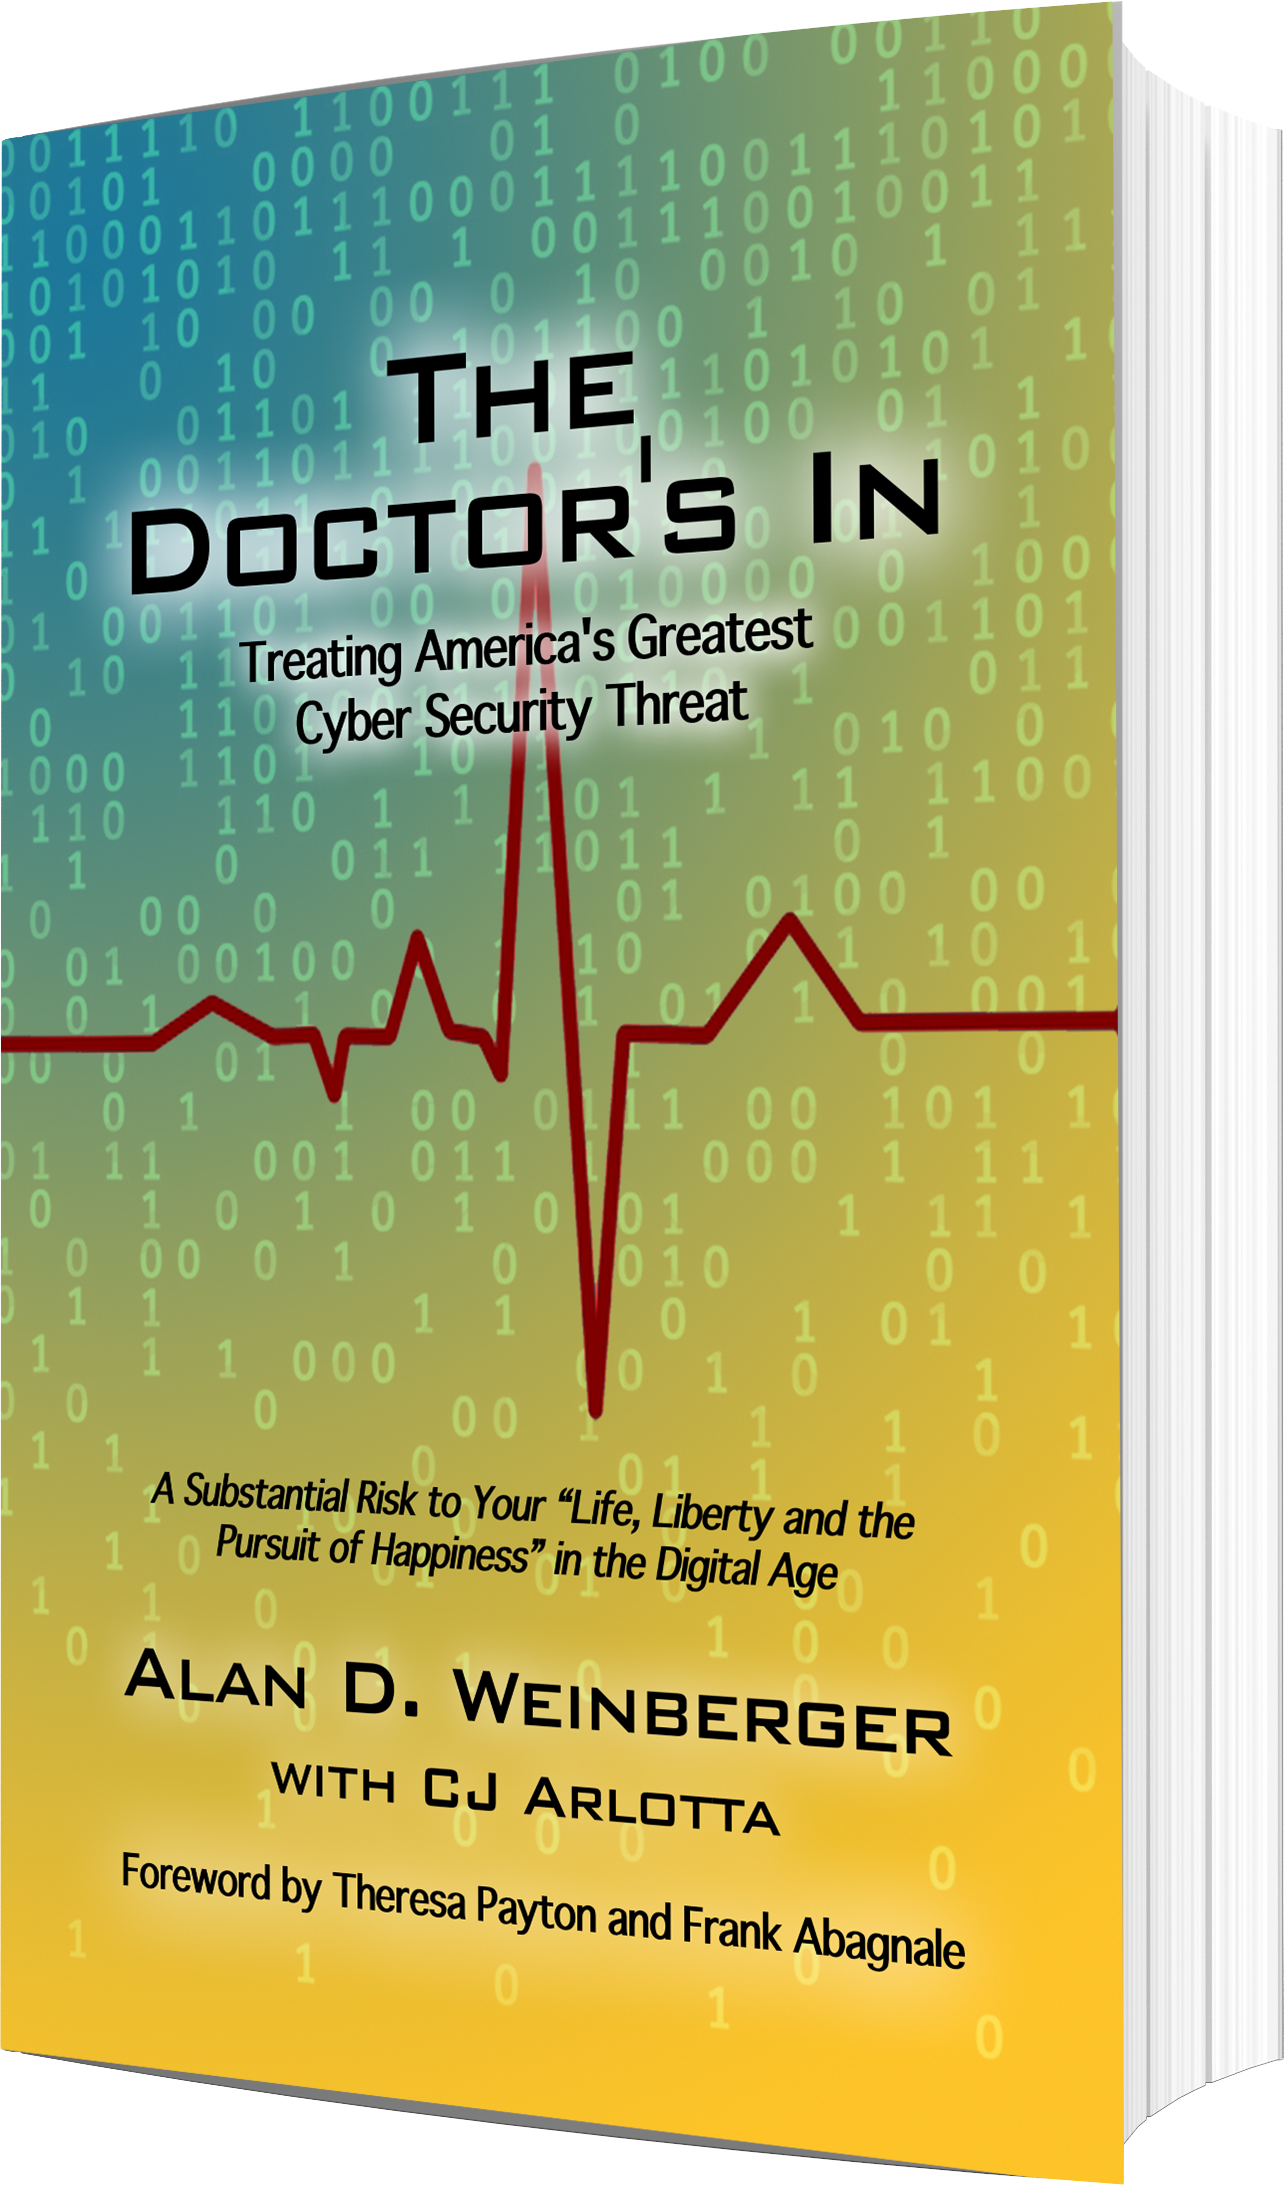 Alan D. Weinberger Discusses Recent Book on Cybersecurity